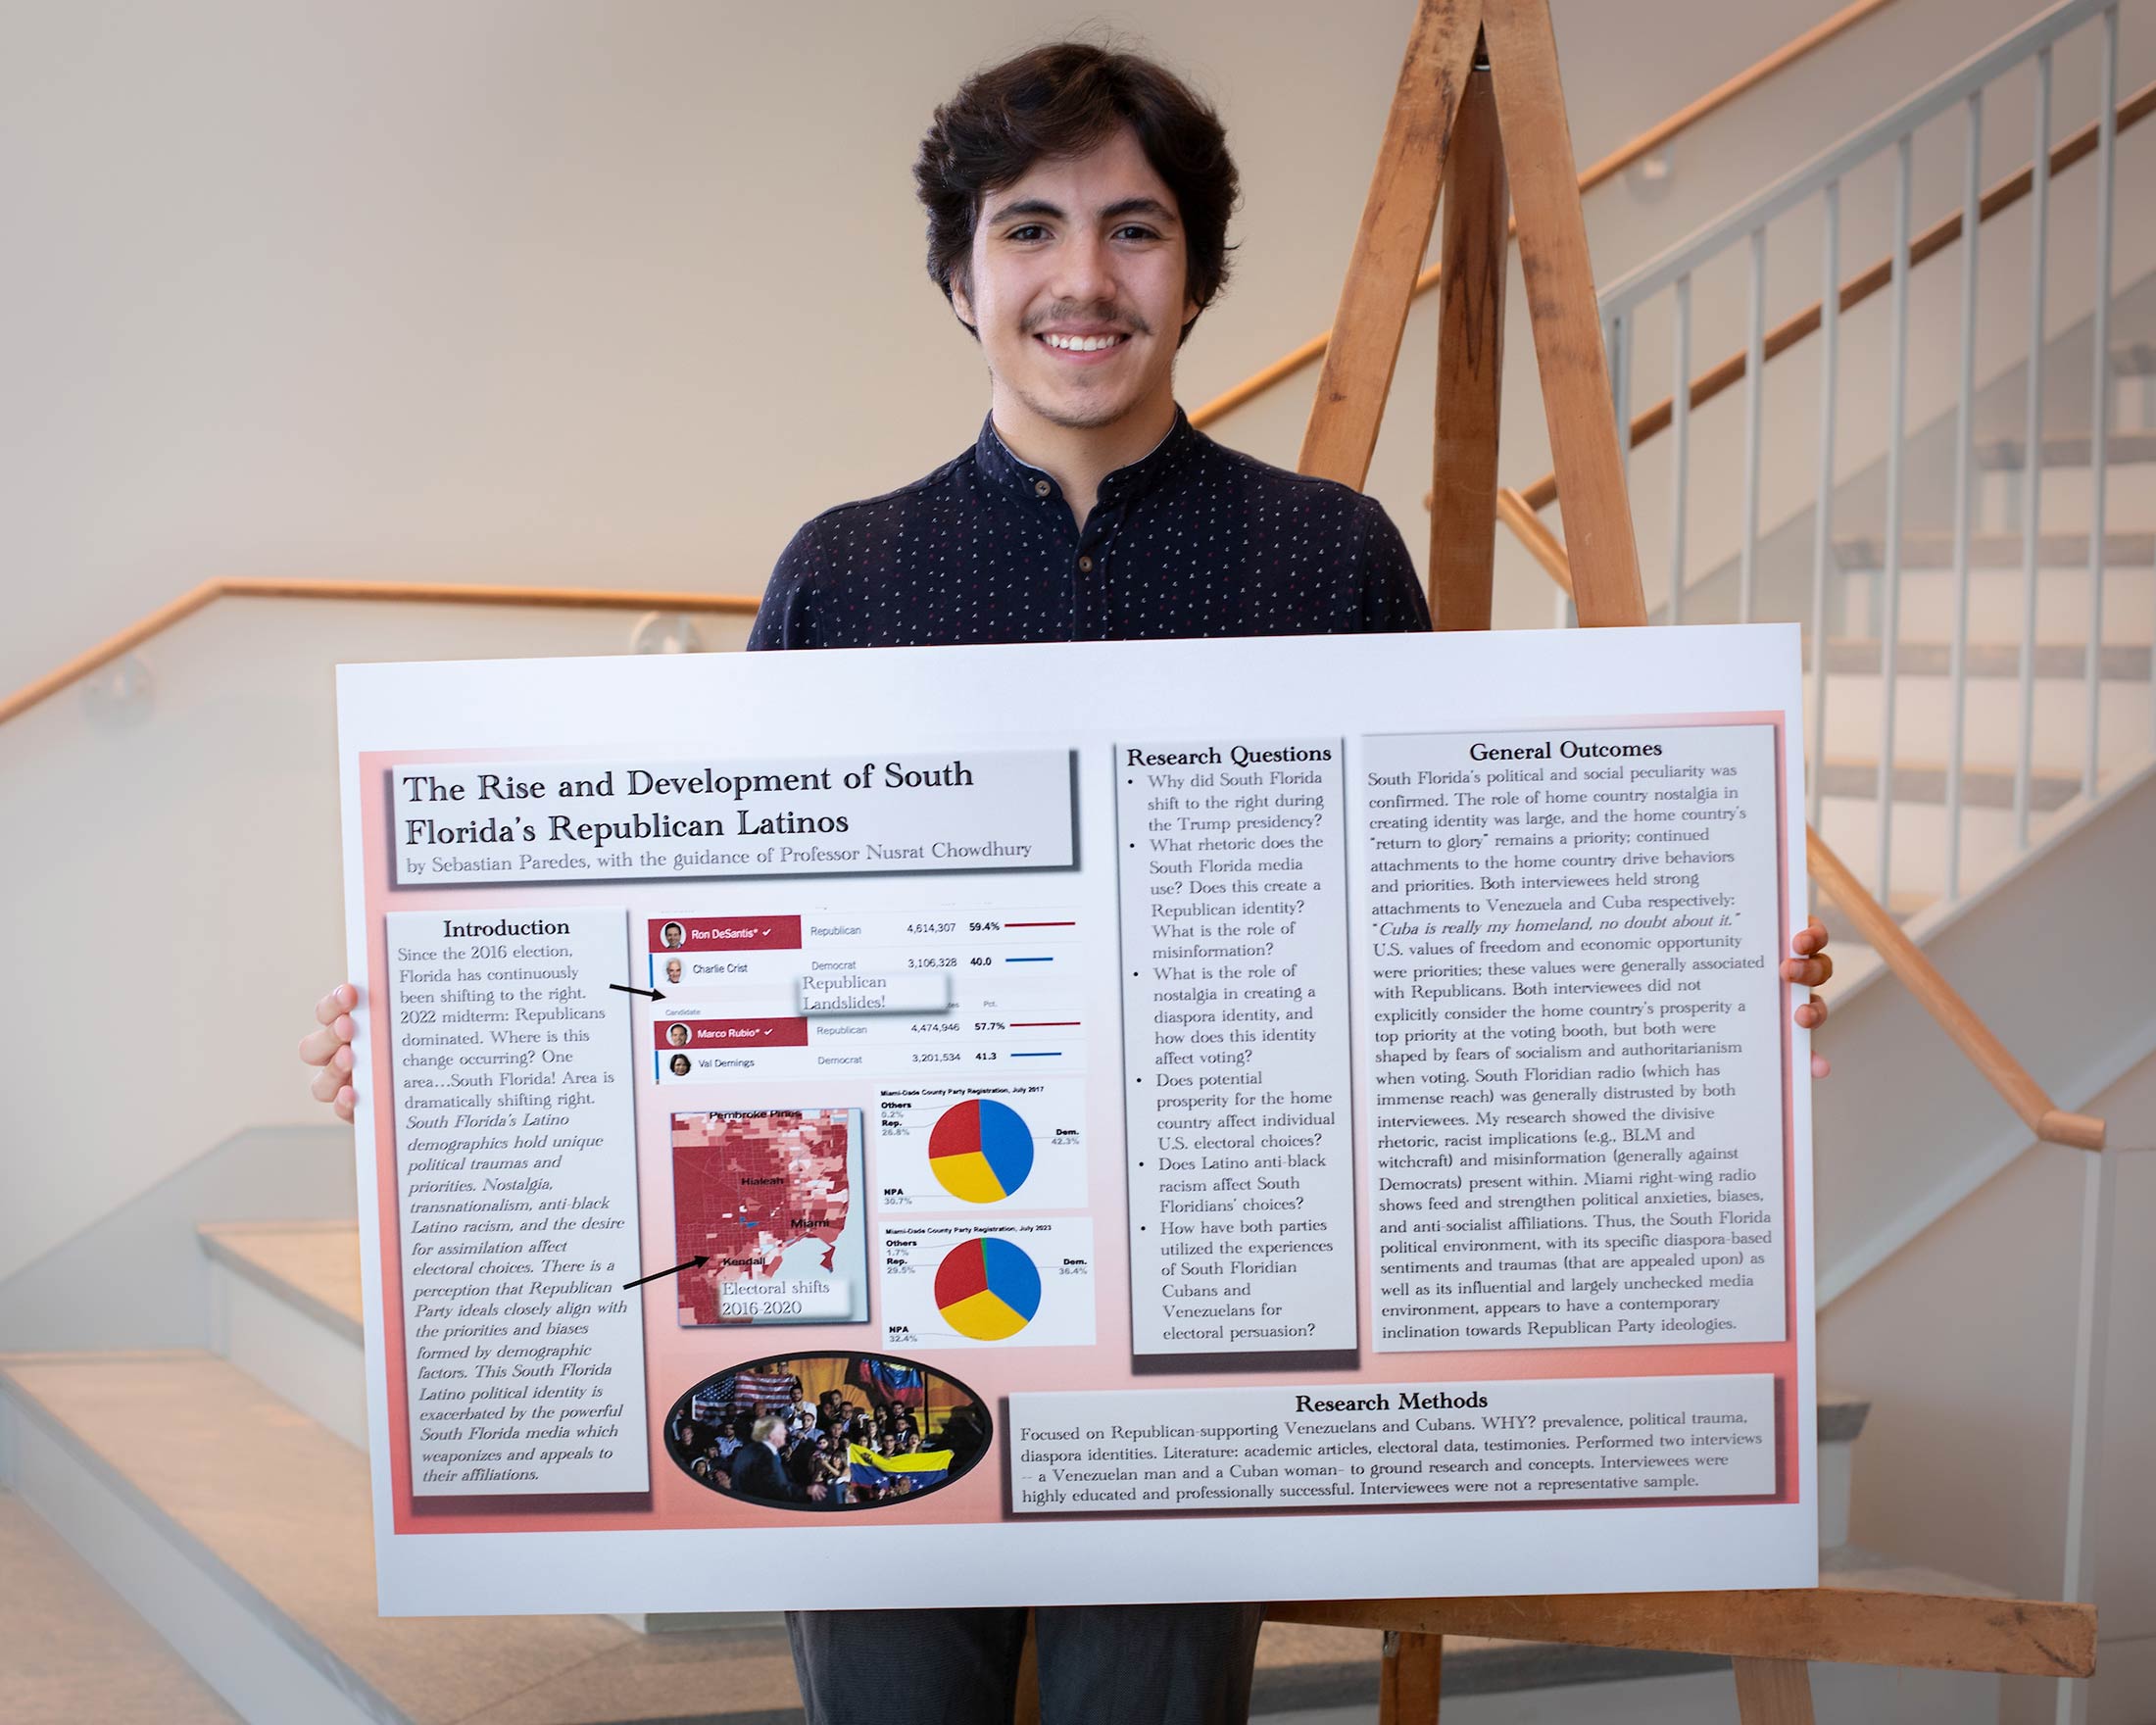 Sebastian Paredes holds a research posster titled The Rise and Development of South Florida's Republican Latinos.